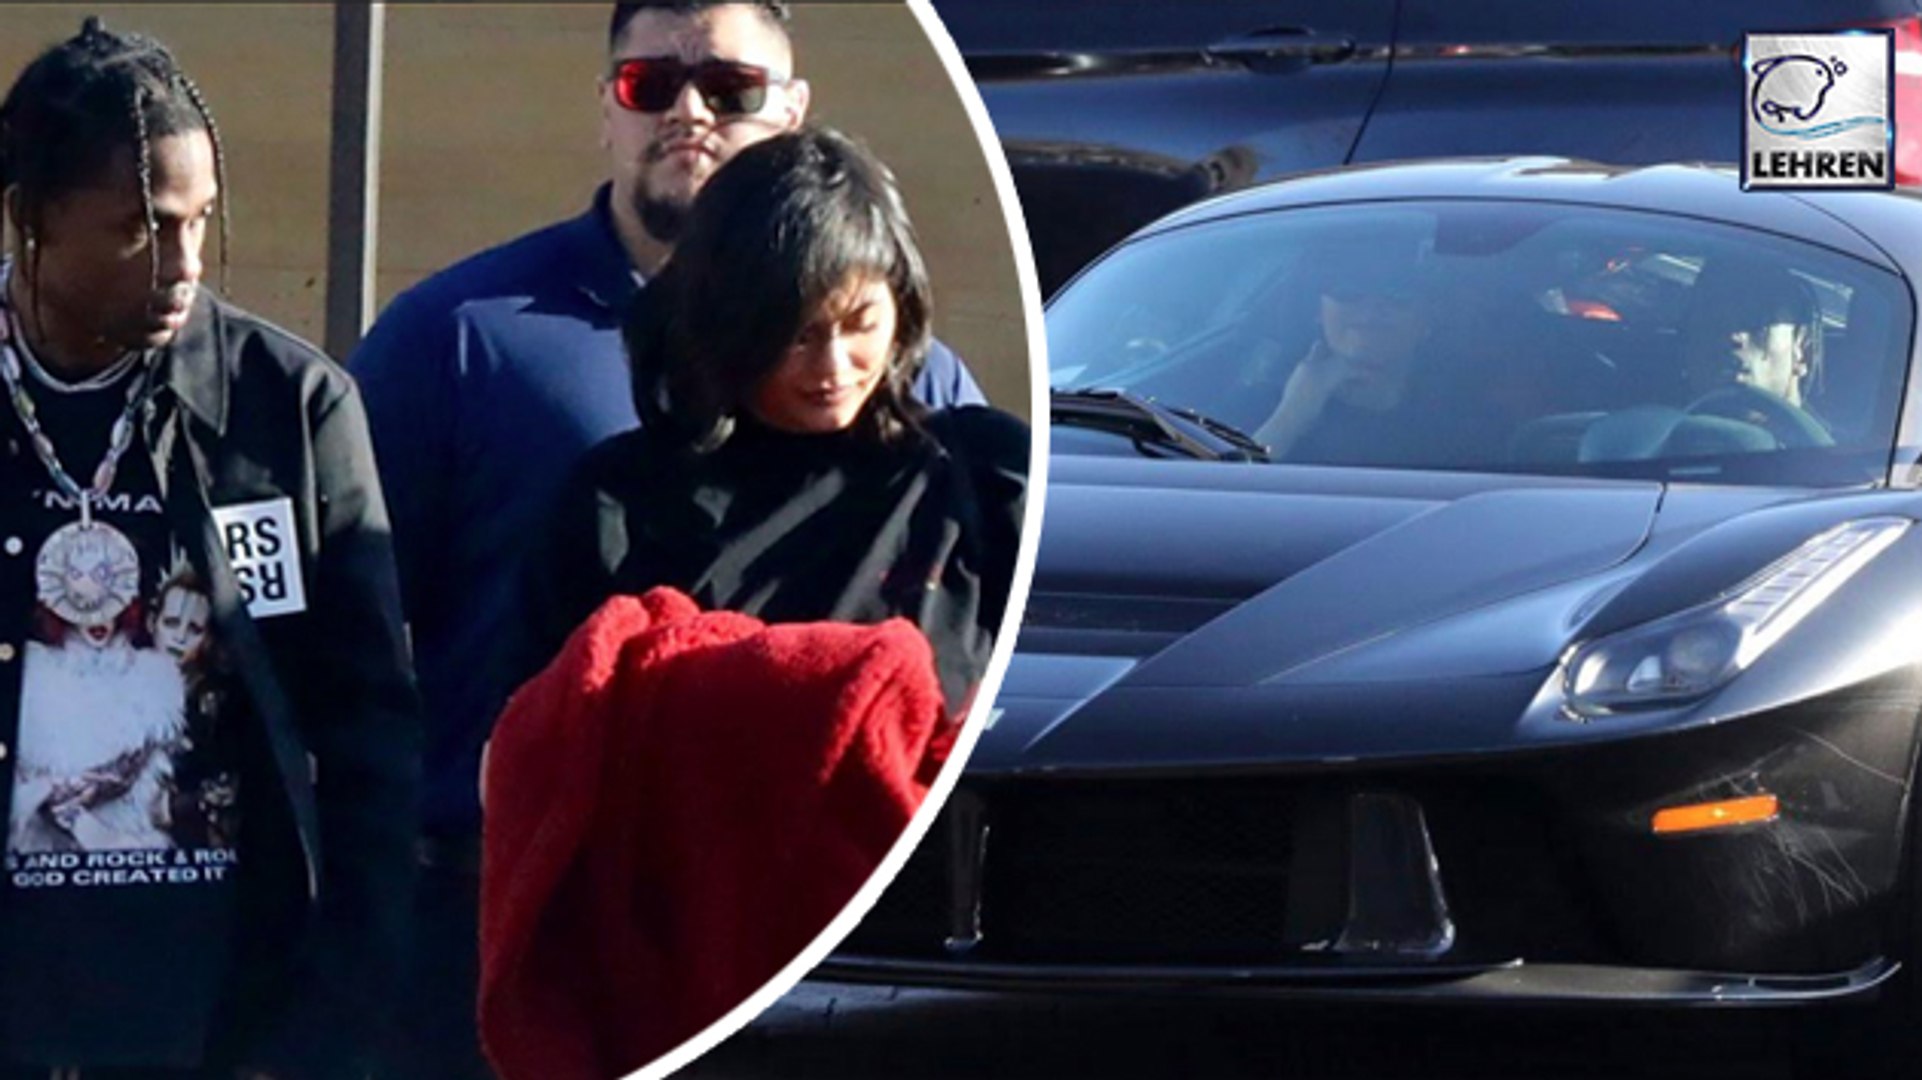 Kylie Jenner & Travis Scott Seen Together For 1st Time After Stormi's Birth